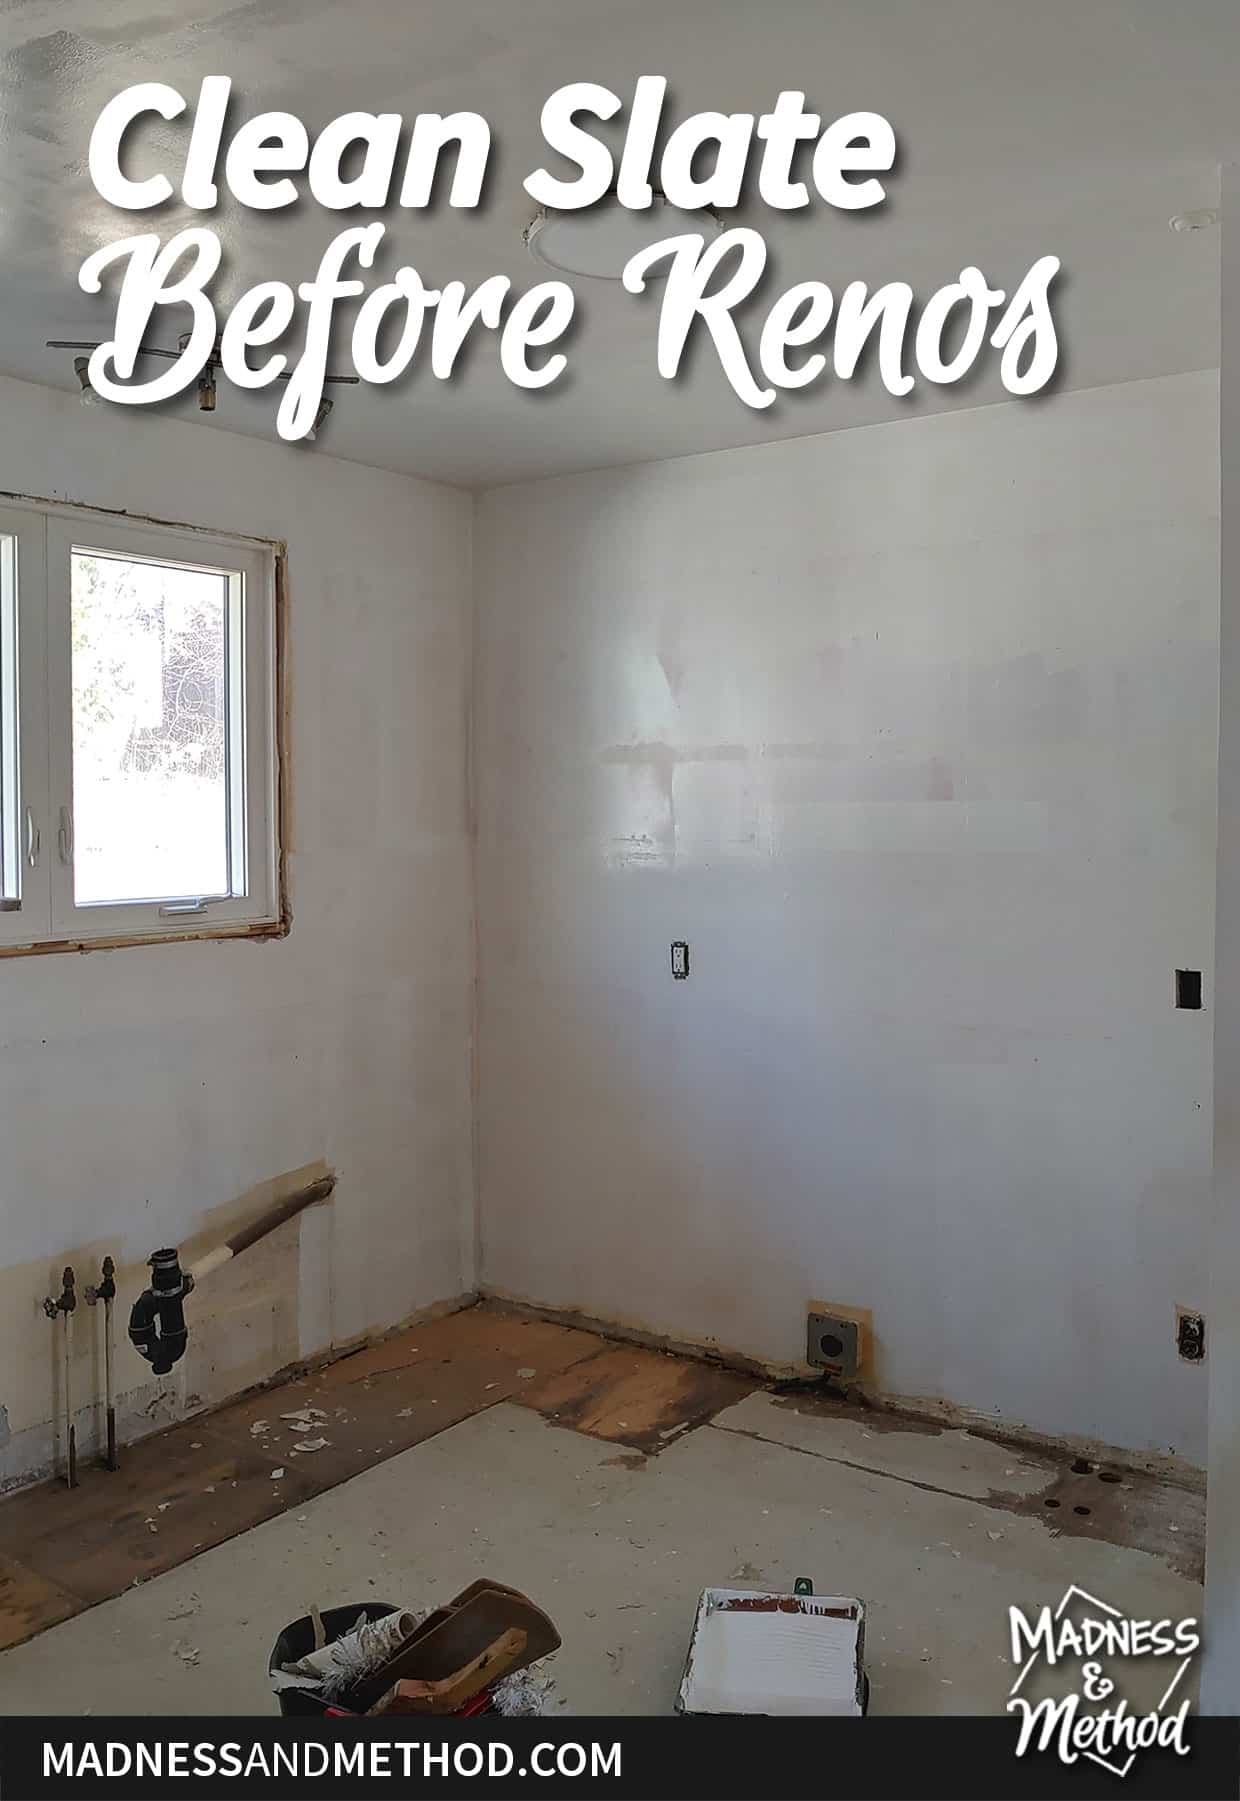 clean slate before renos graphic